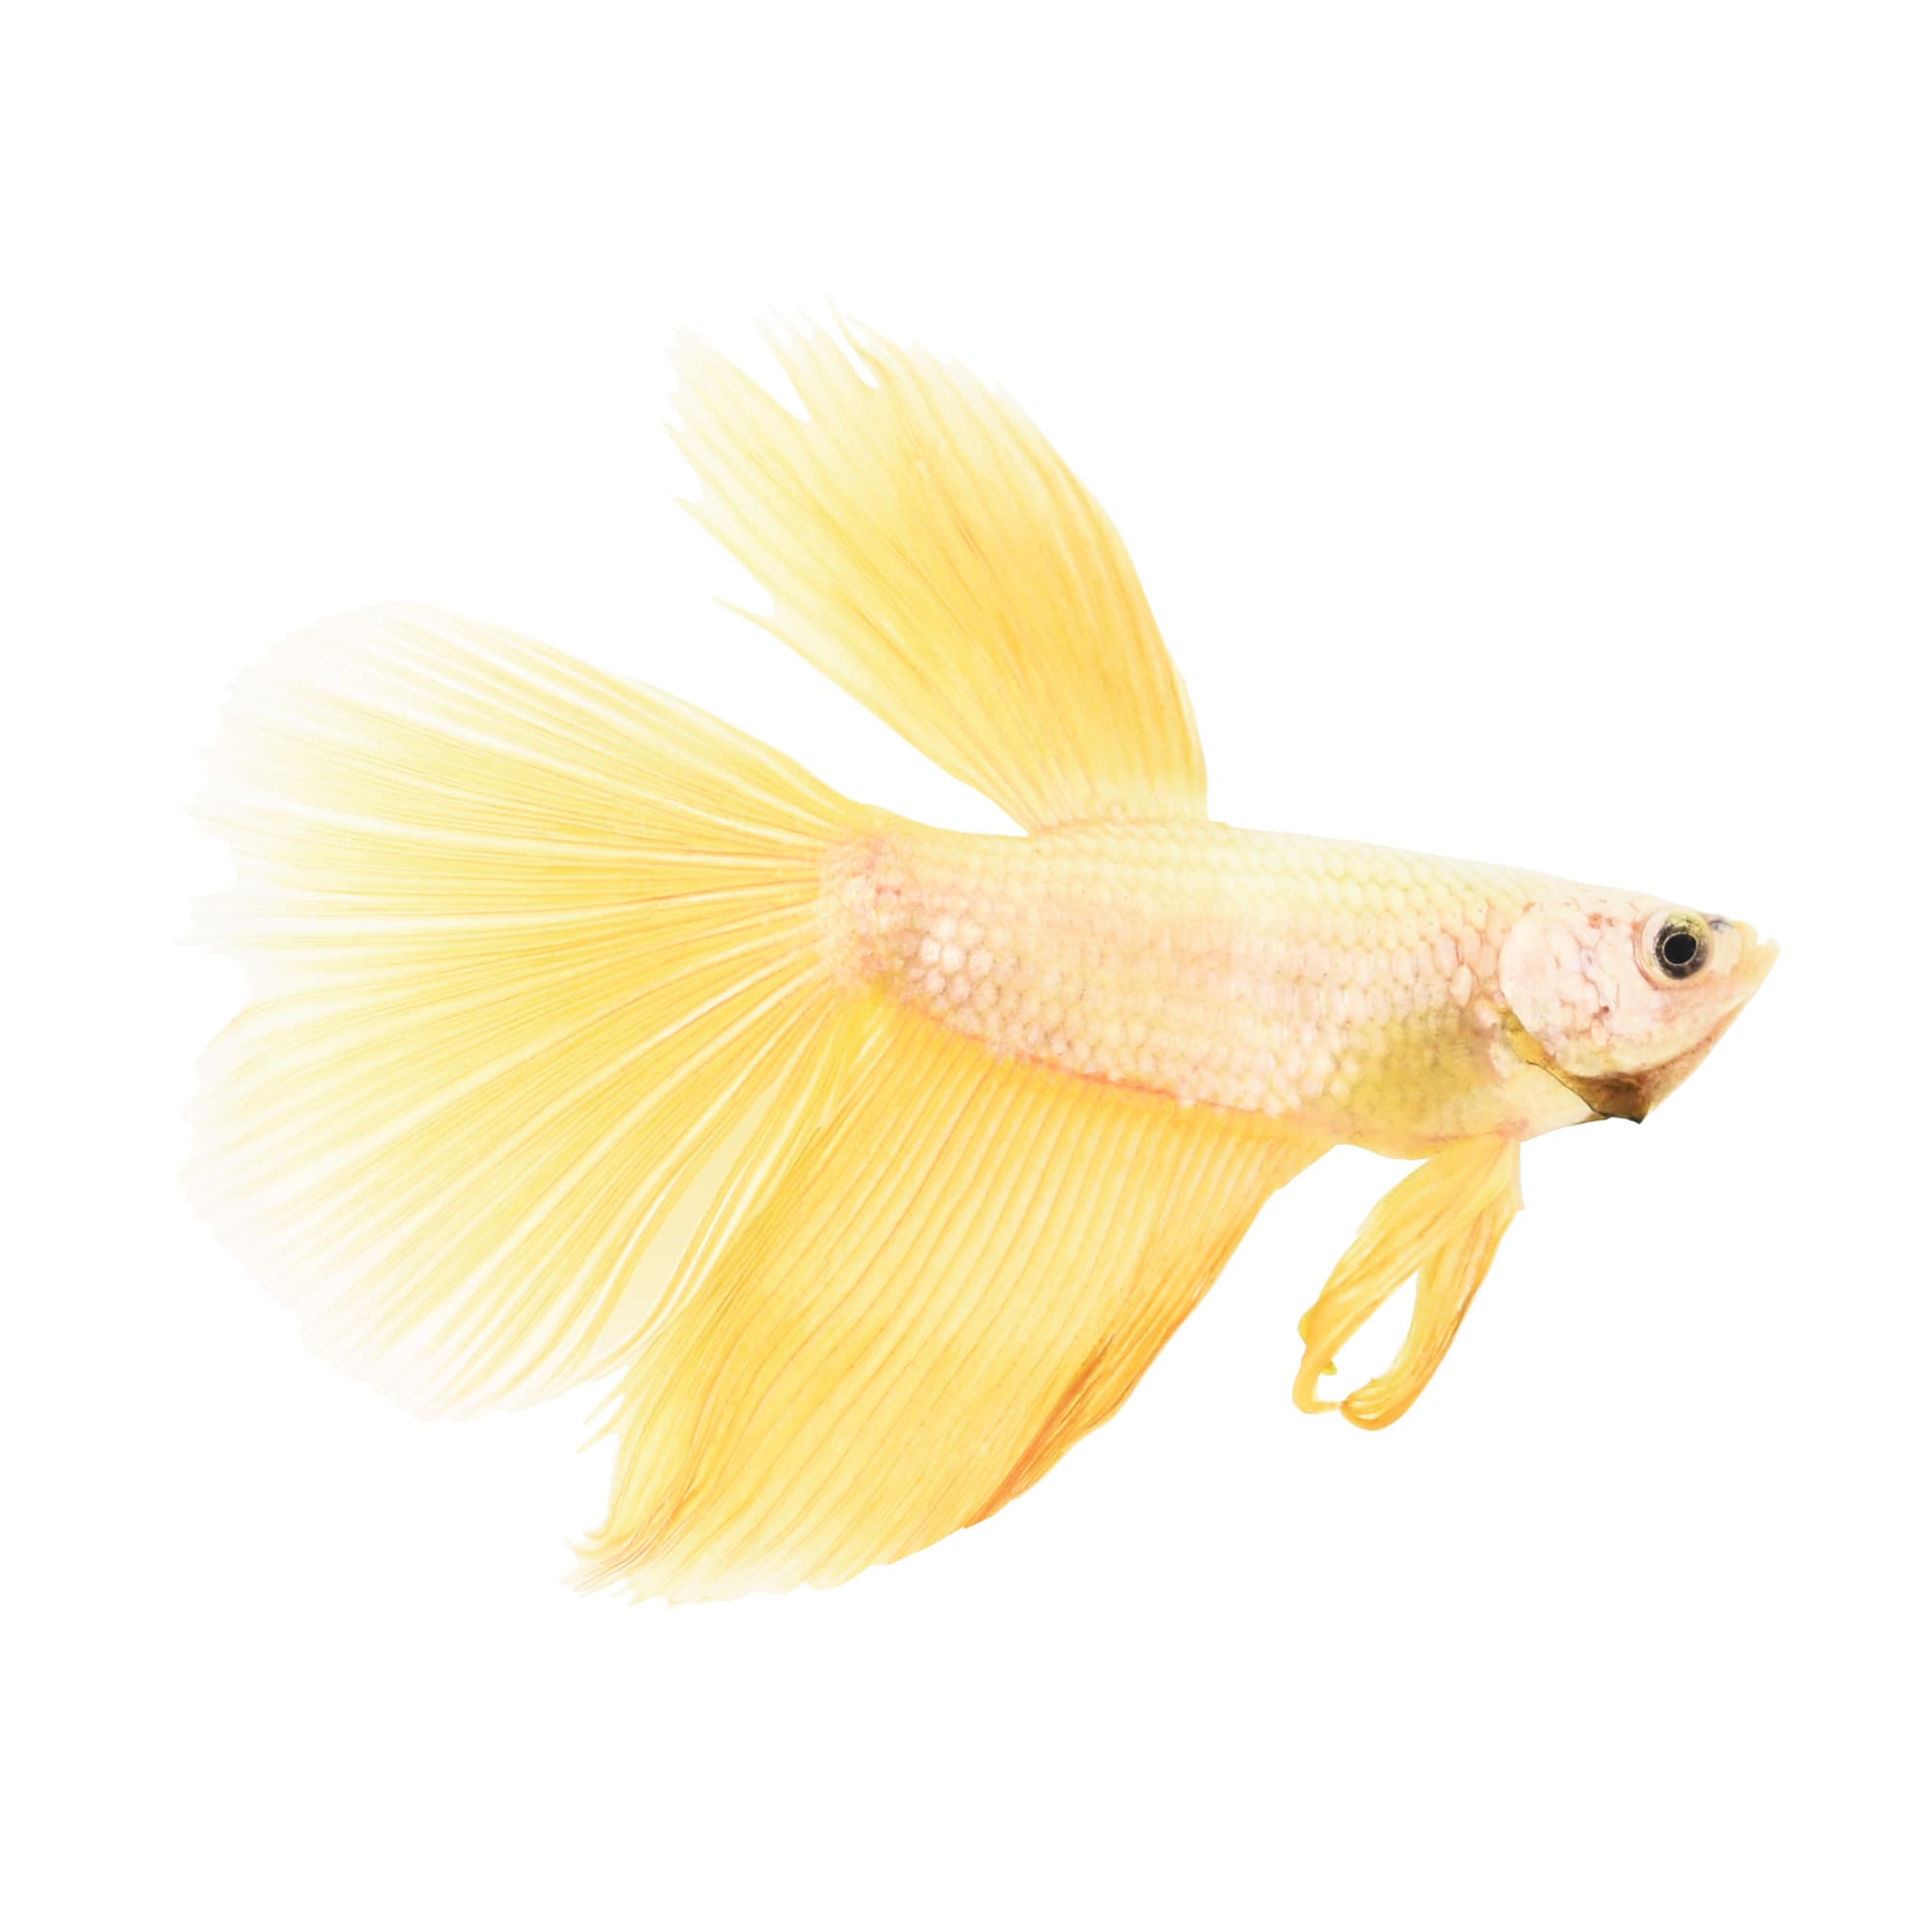 Male Rose Gold Bettas For Sale Order Online Petco